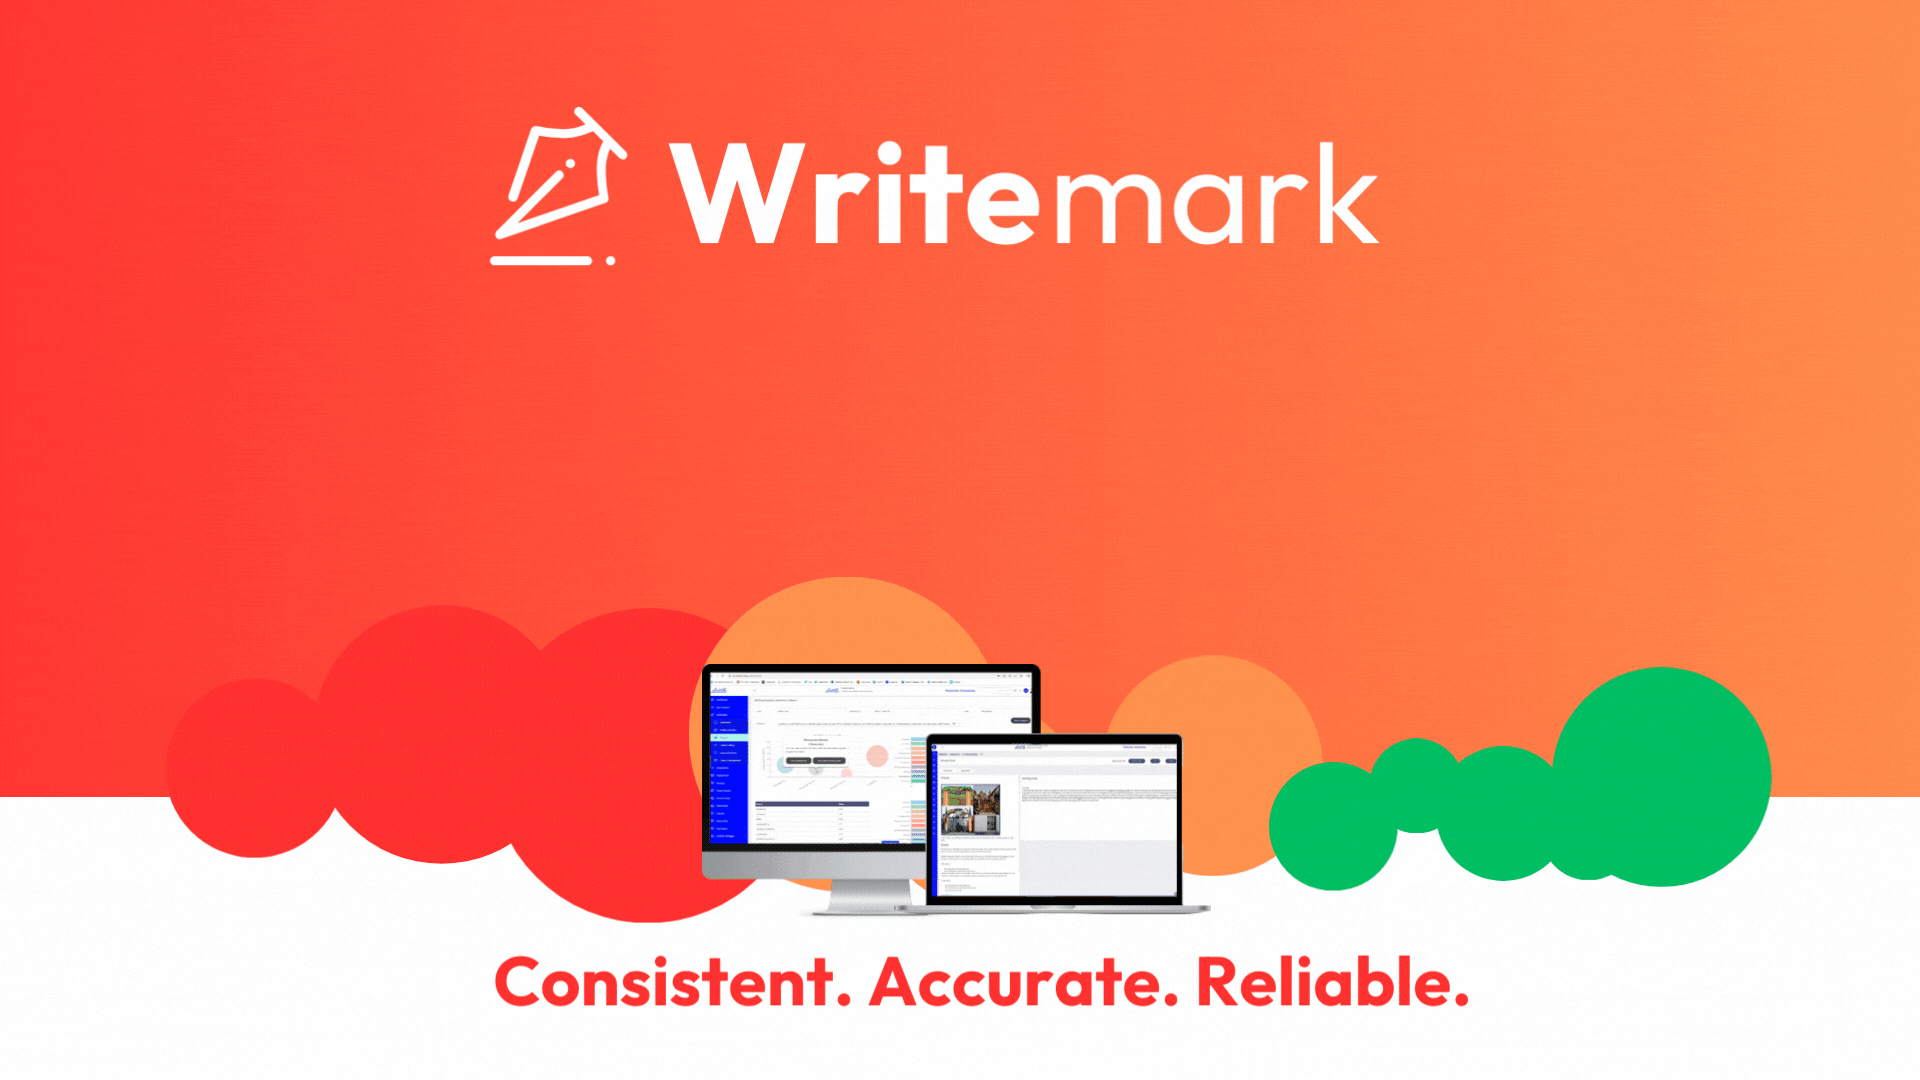 Writemark analysing handwritten text and converting to typed text.